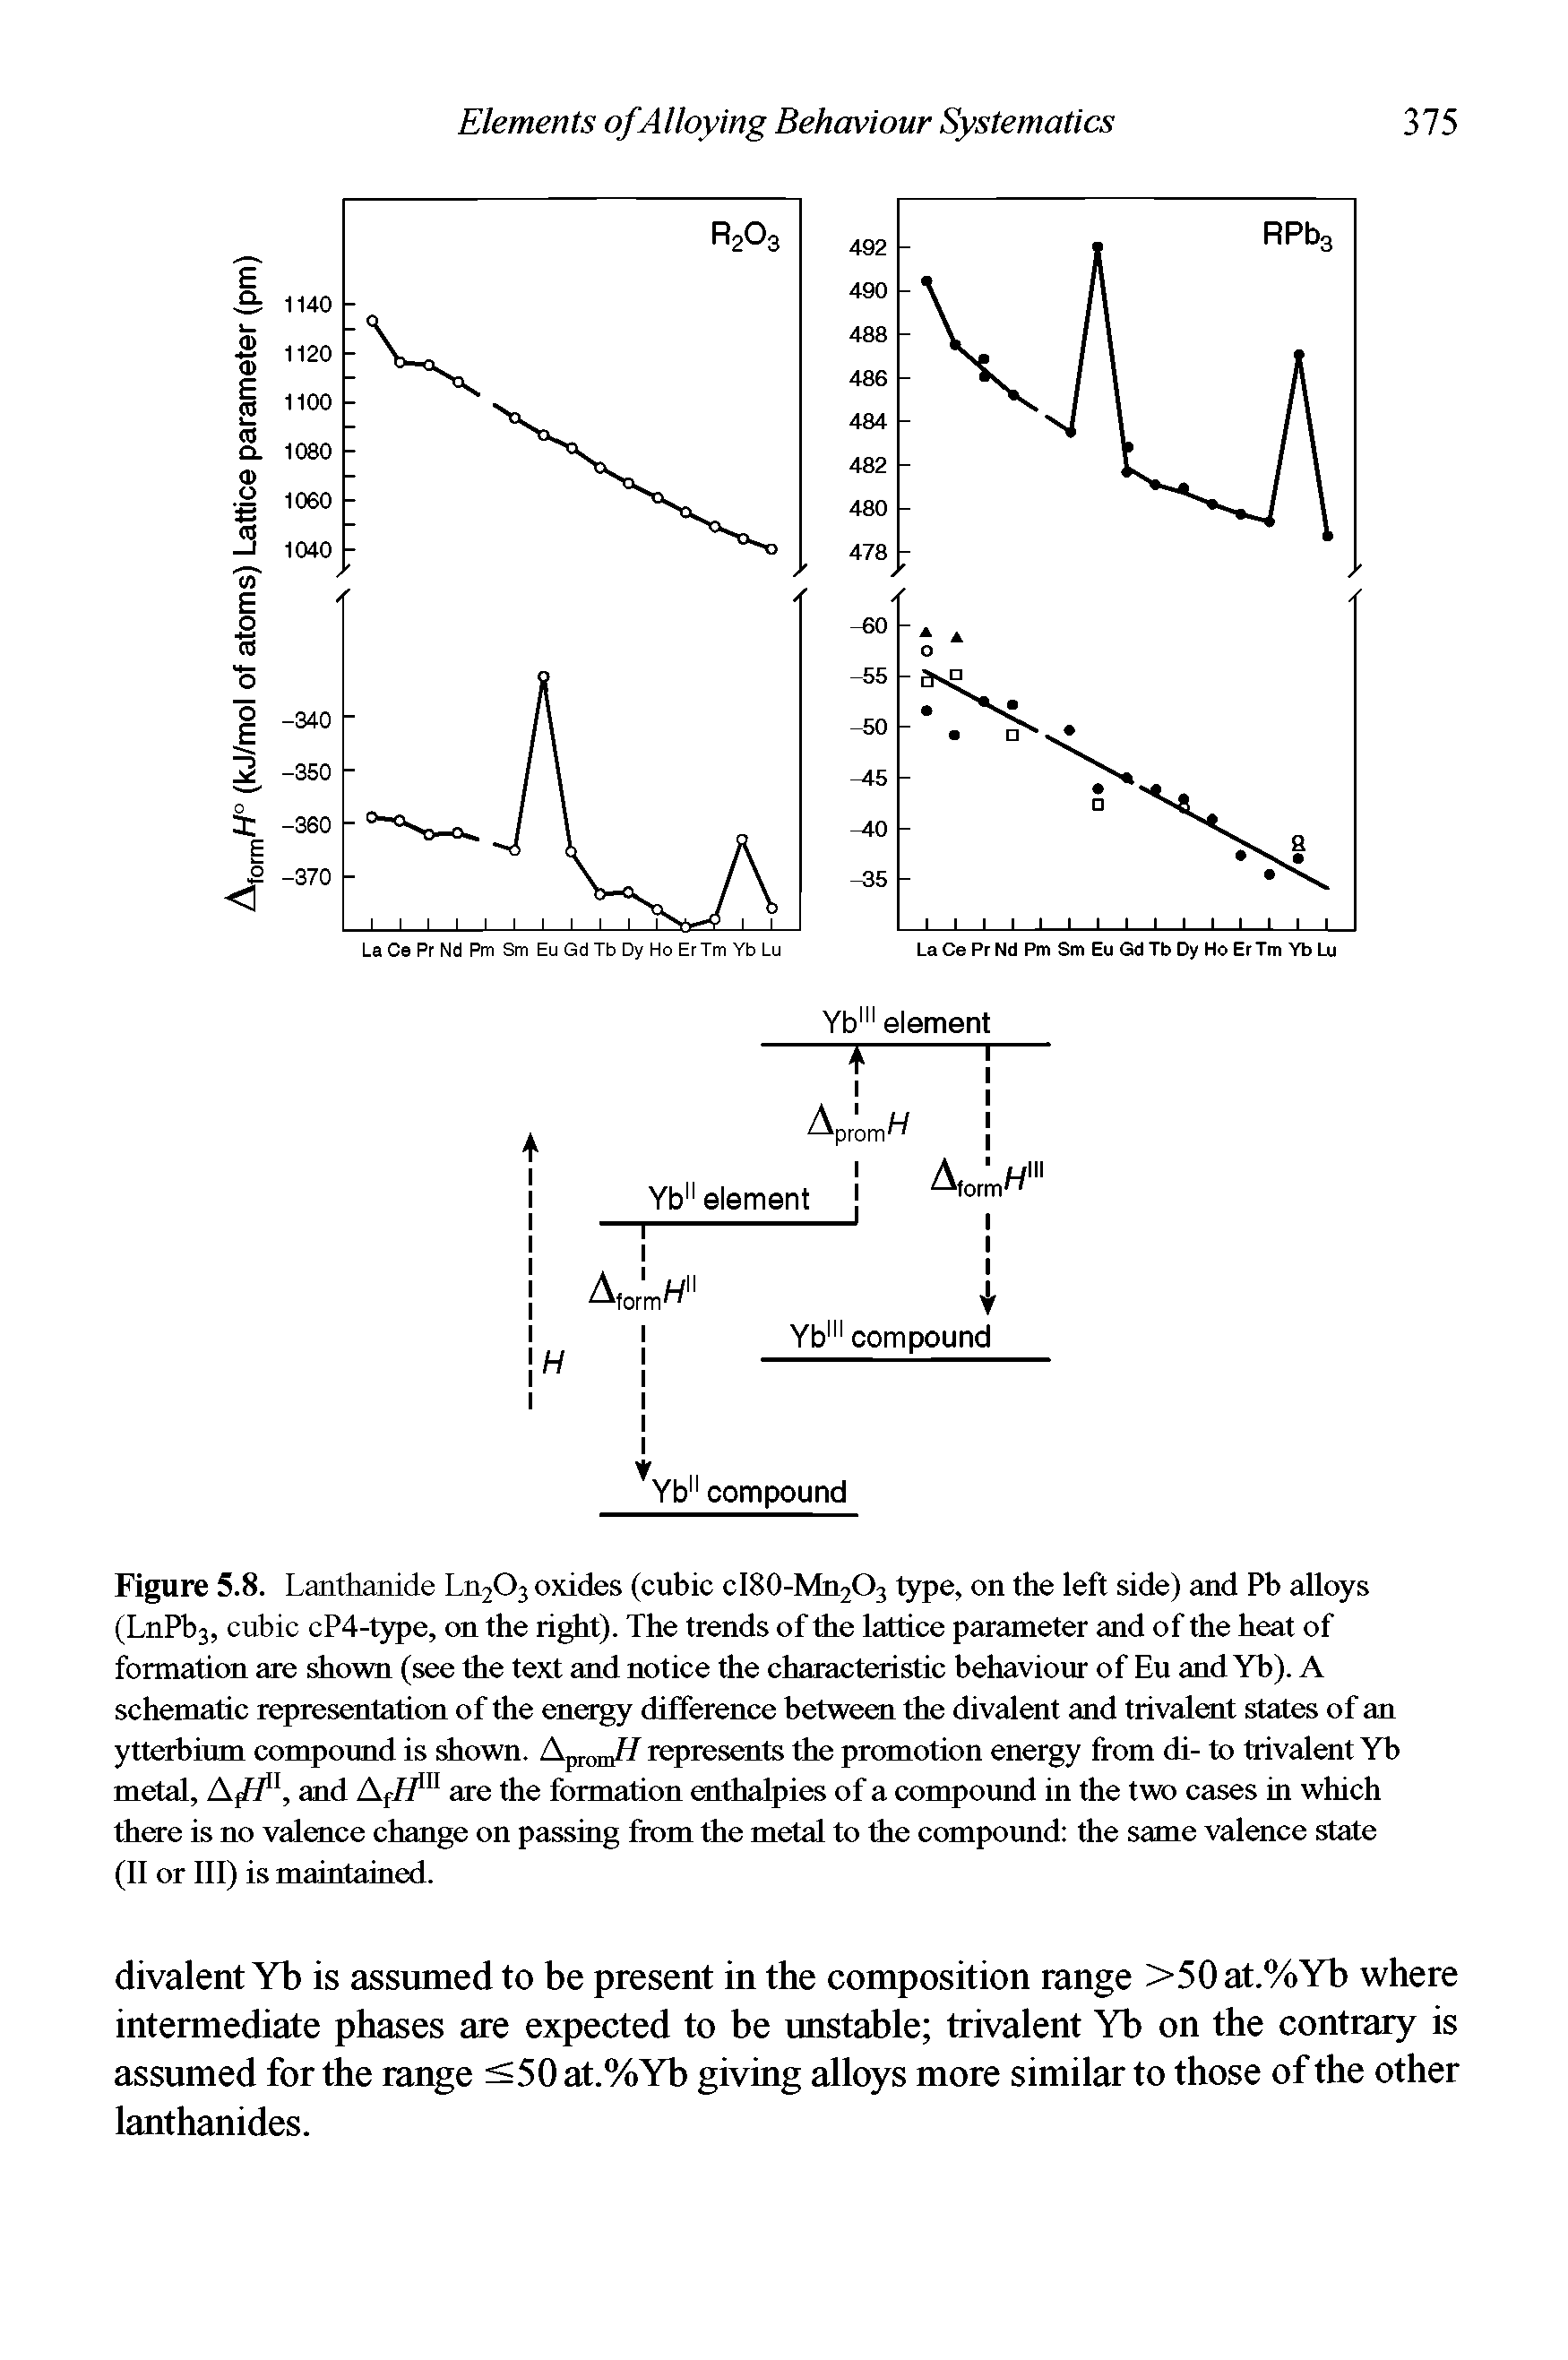 Figure 5.8. Lanthanide Ln203 oxides (cubic cI80-Mn2O3 type, on the left side) and Pb alloys (LnPb3, cubic cP4-type, on the right). The trends of the lattice parameter and of the heat of formation are shown (see the text and notice the characteristic behaviour of Eu and Yb). A schematic representation of the energy difference between the divalent and trivalent states of an ytterbium compound is shown. Apromff represents the promotion energy from di- to trivalent Yb metal, A,//11, and Ar/Ynl are the formation enthalpies of a compound in the two cases in which there is no valence change on passing from the metal to the compound the same valence state (II or III) is maintained.